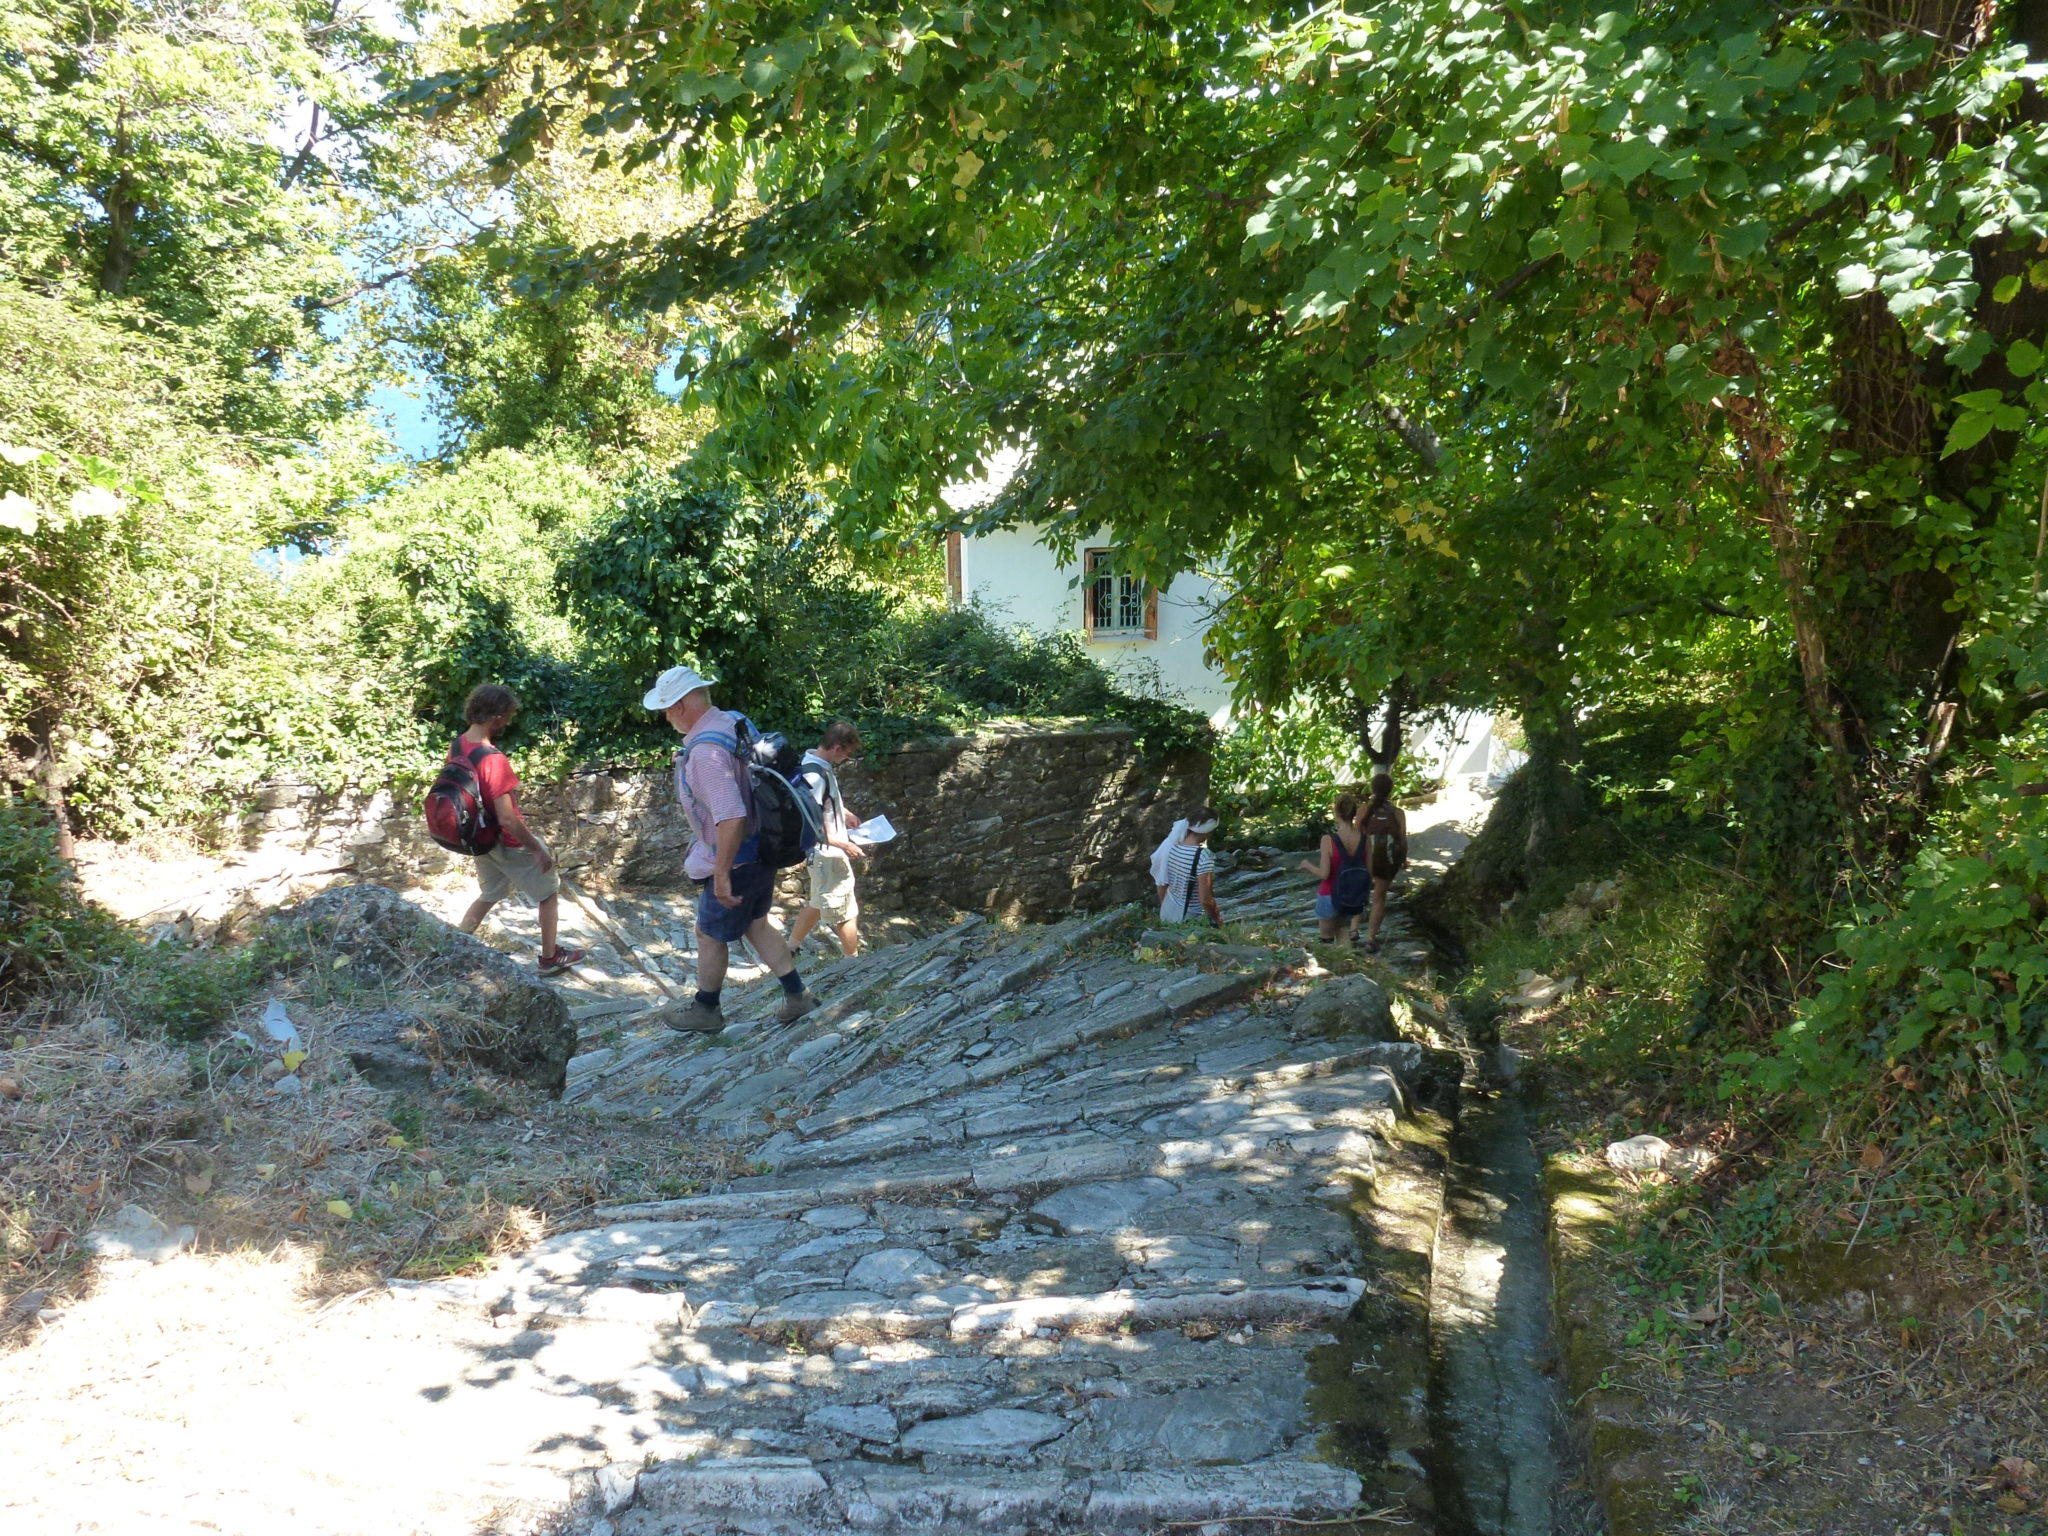 Michelle guides us down the ancient donkey paths that lead from Pouri towards the sea